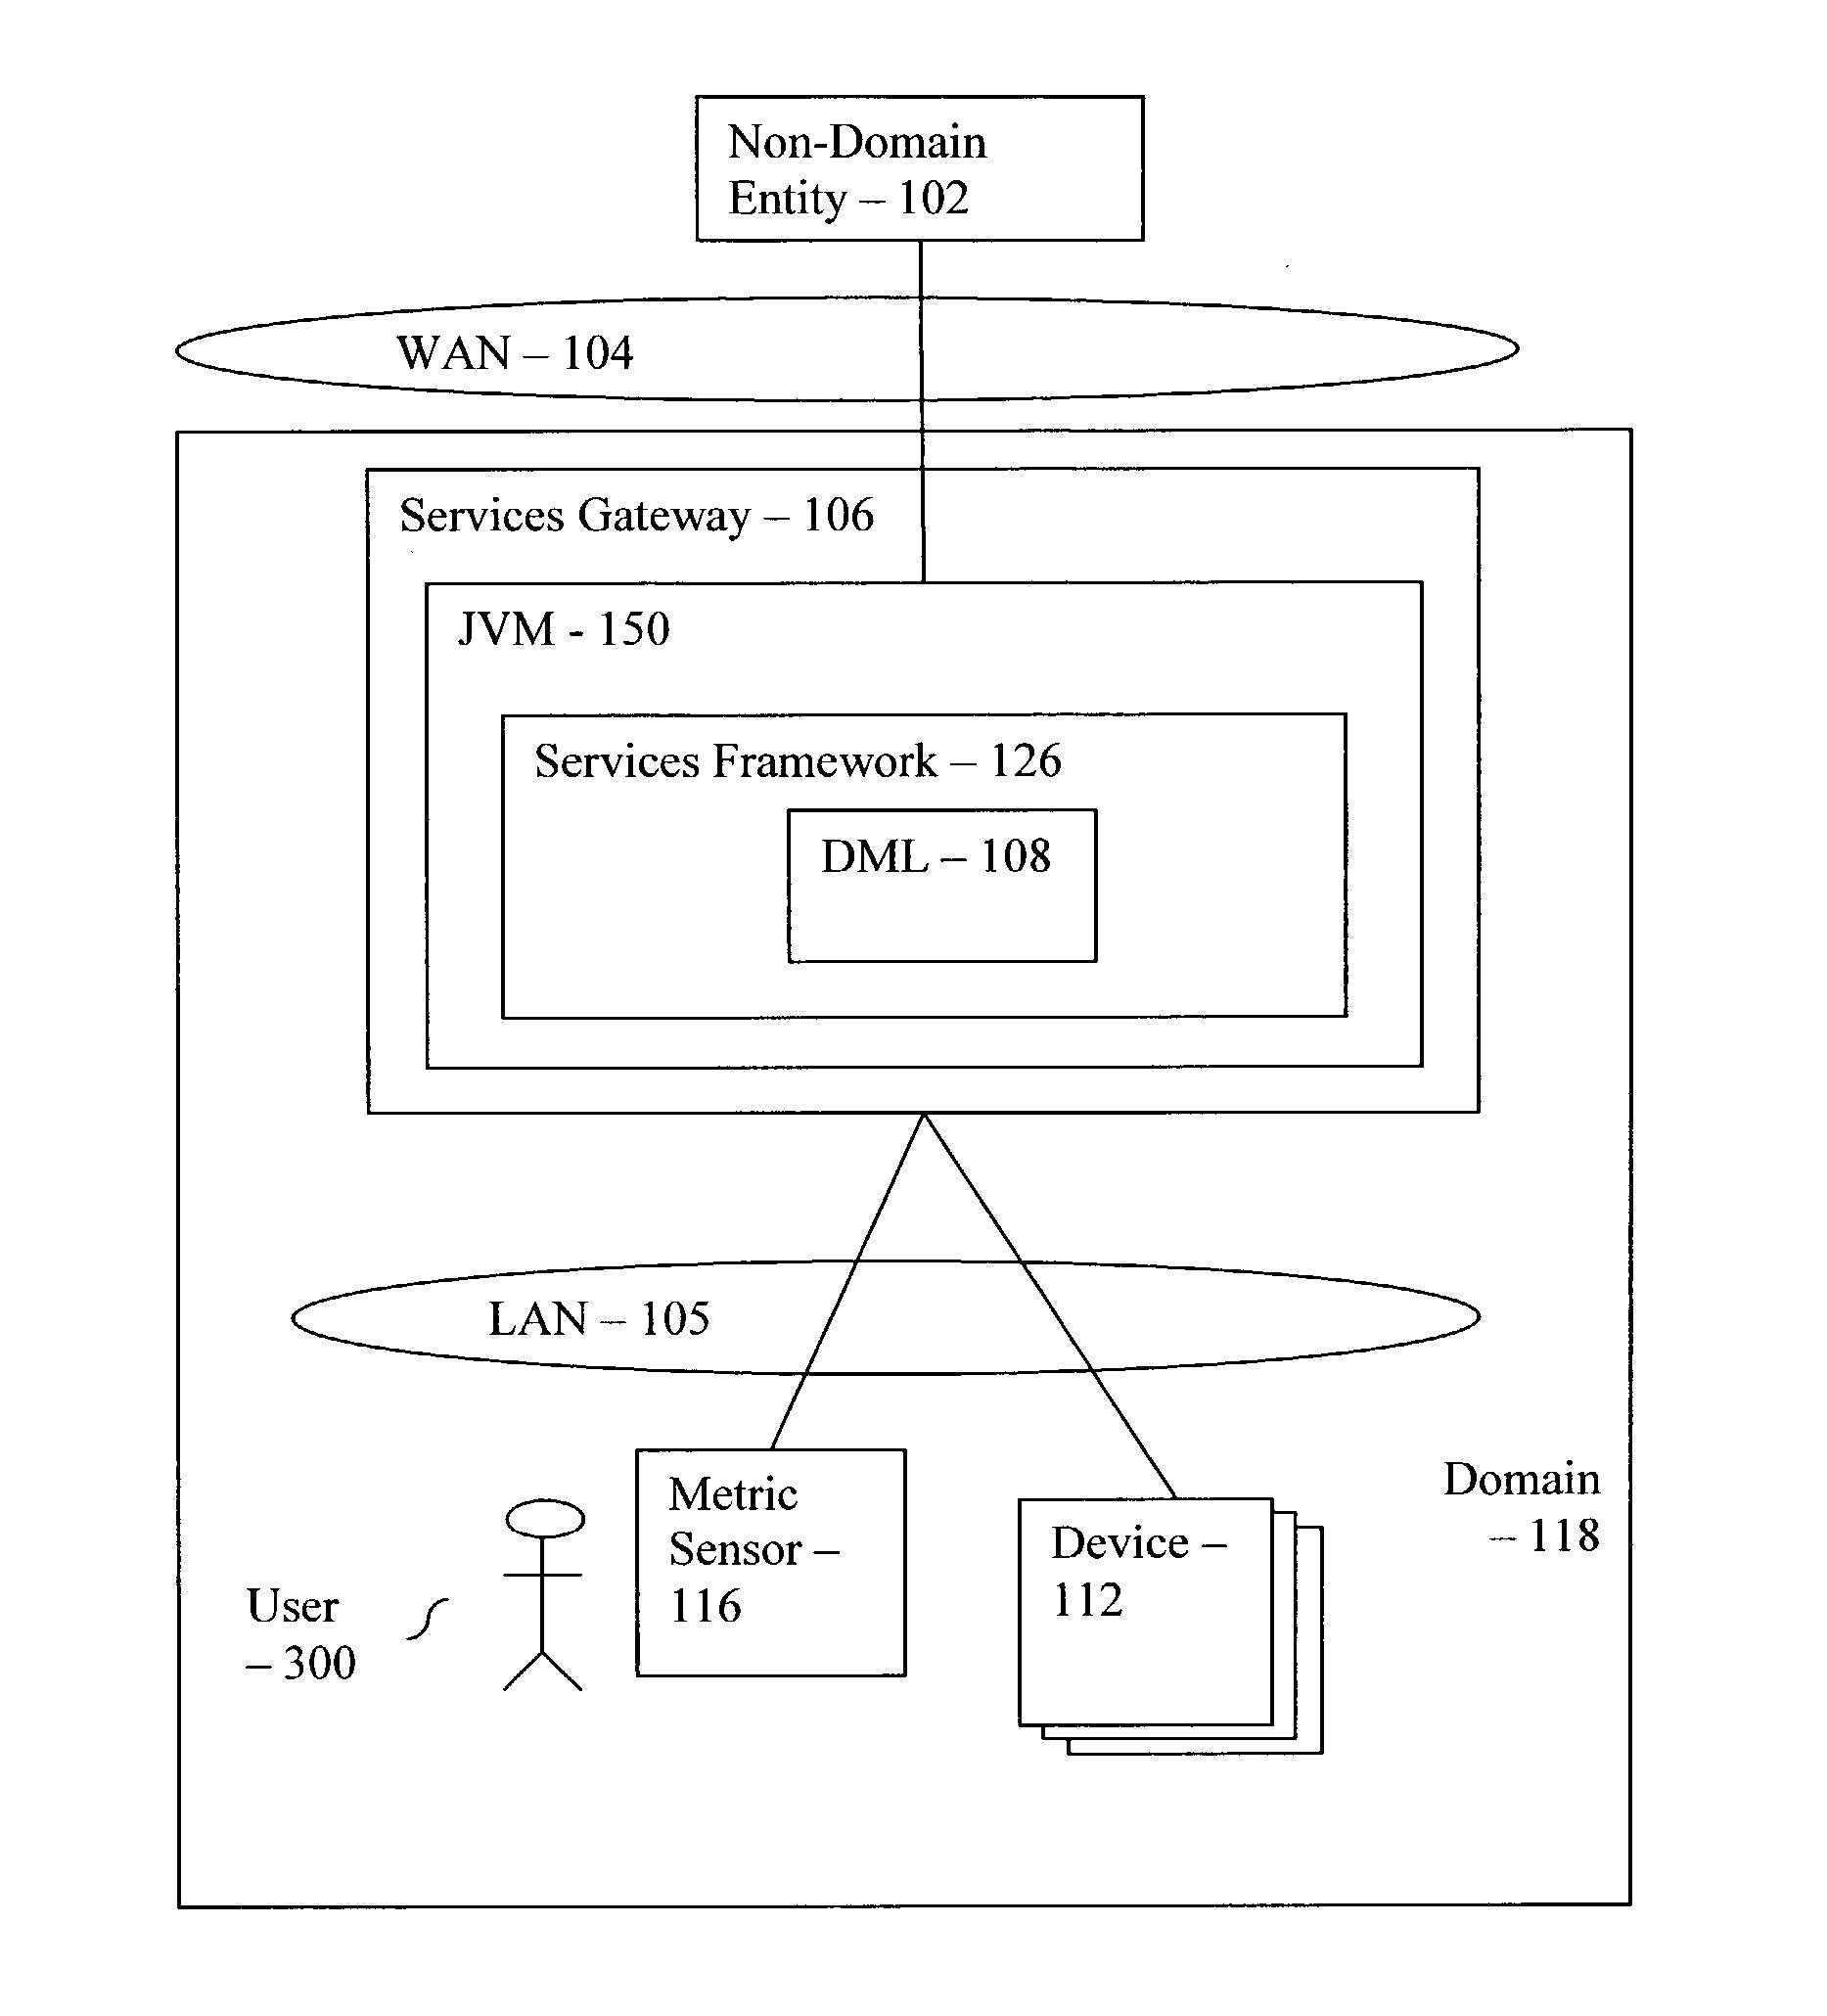 Method and system for administering devices including an action log